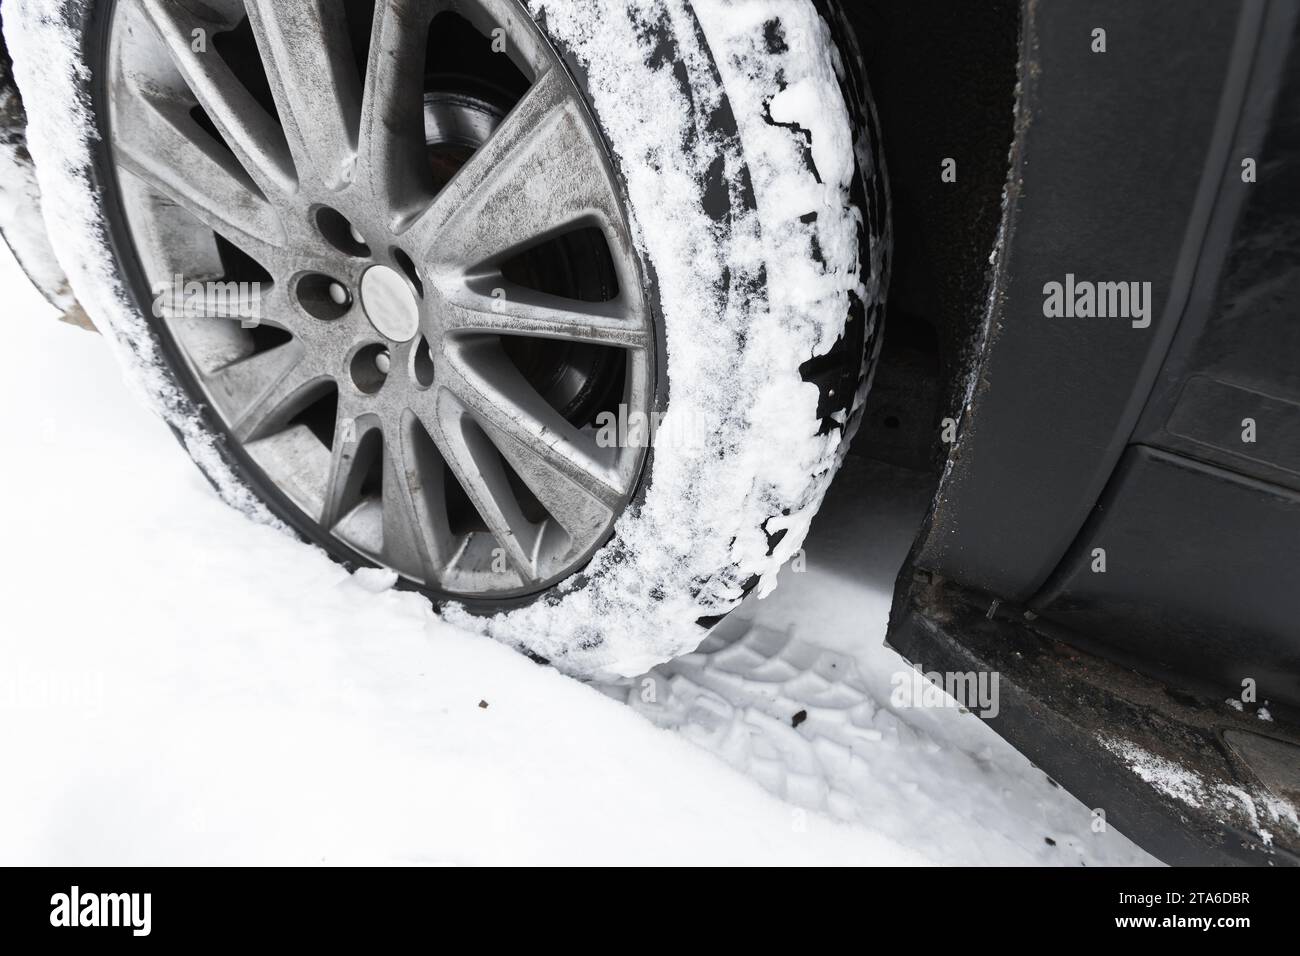 A car wheel on snow tire with metal studs. Close-up photo with selective focus Stock Photo